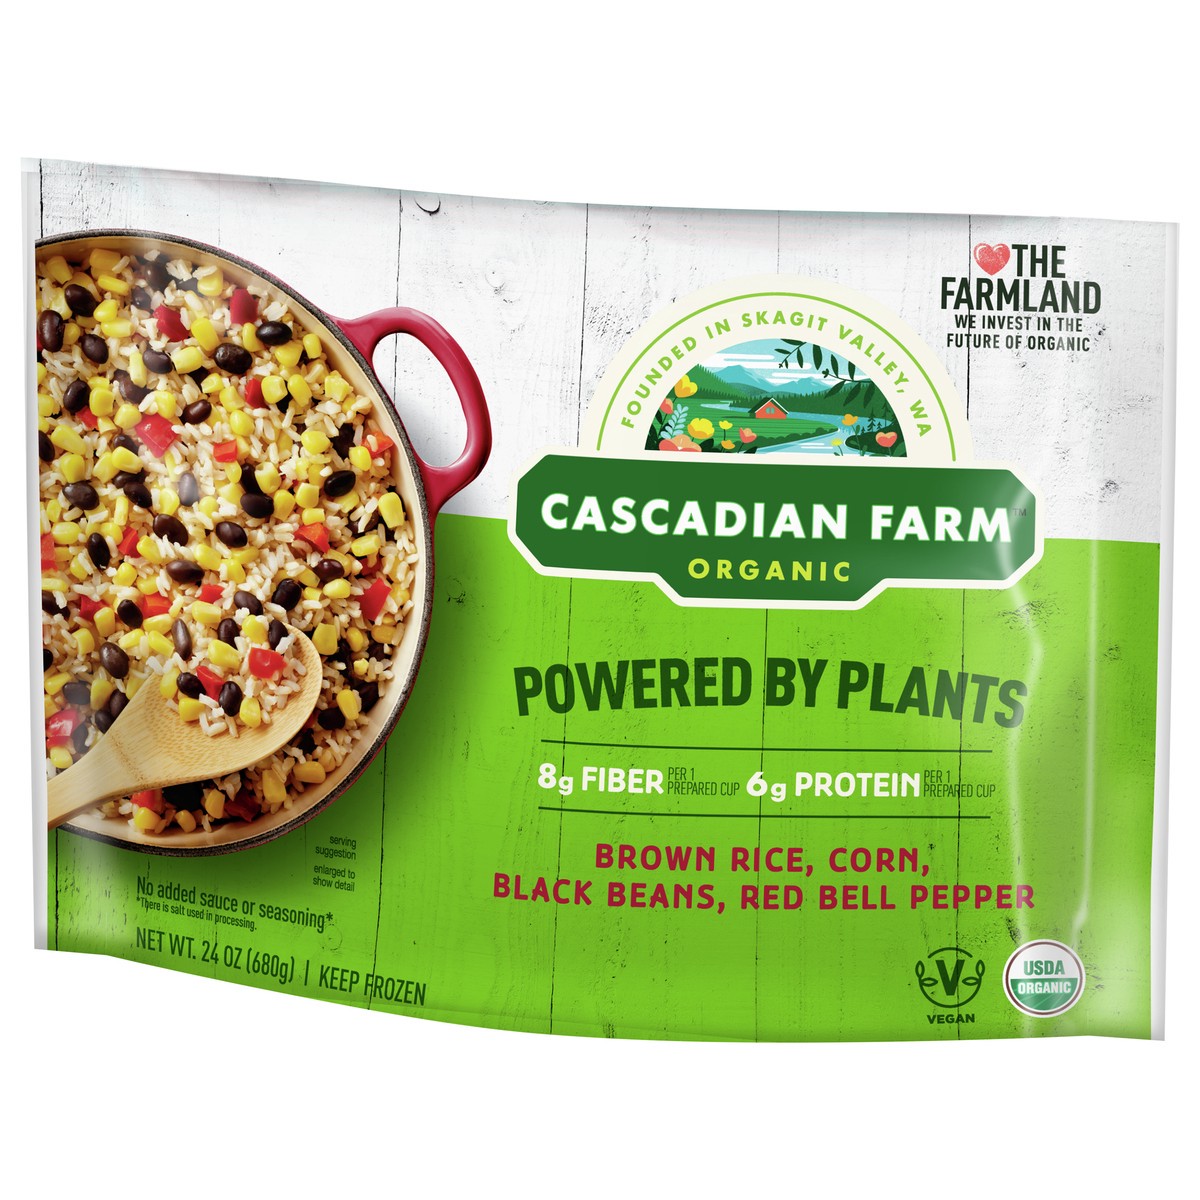 slide 7 of 9, Cascadian Farm Organic Powered By Plants Frozen Vegetables – Brown Rice, Corn, Black Beans and Red Bell Pepper, 24 oz., 24 oz